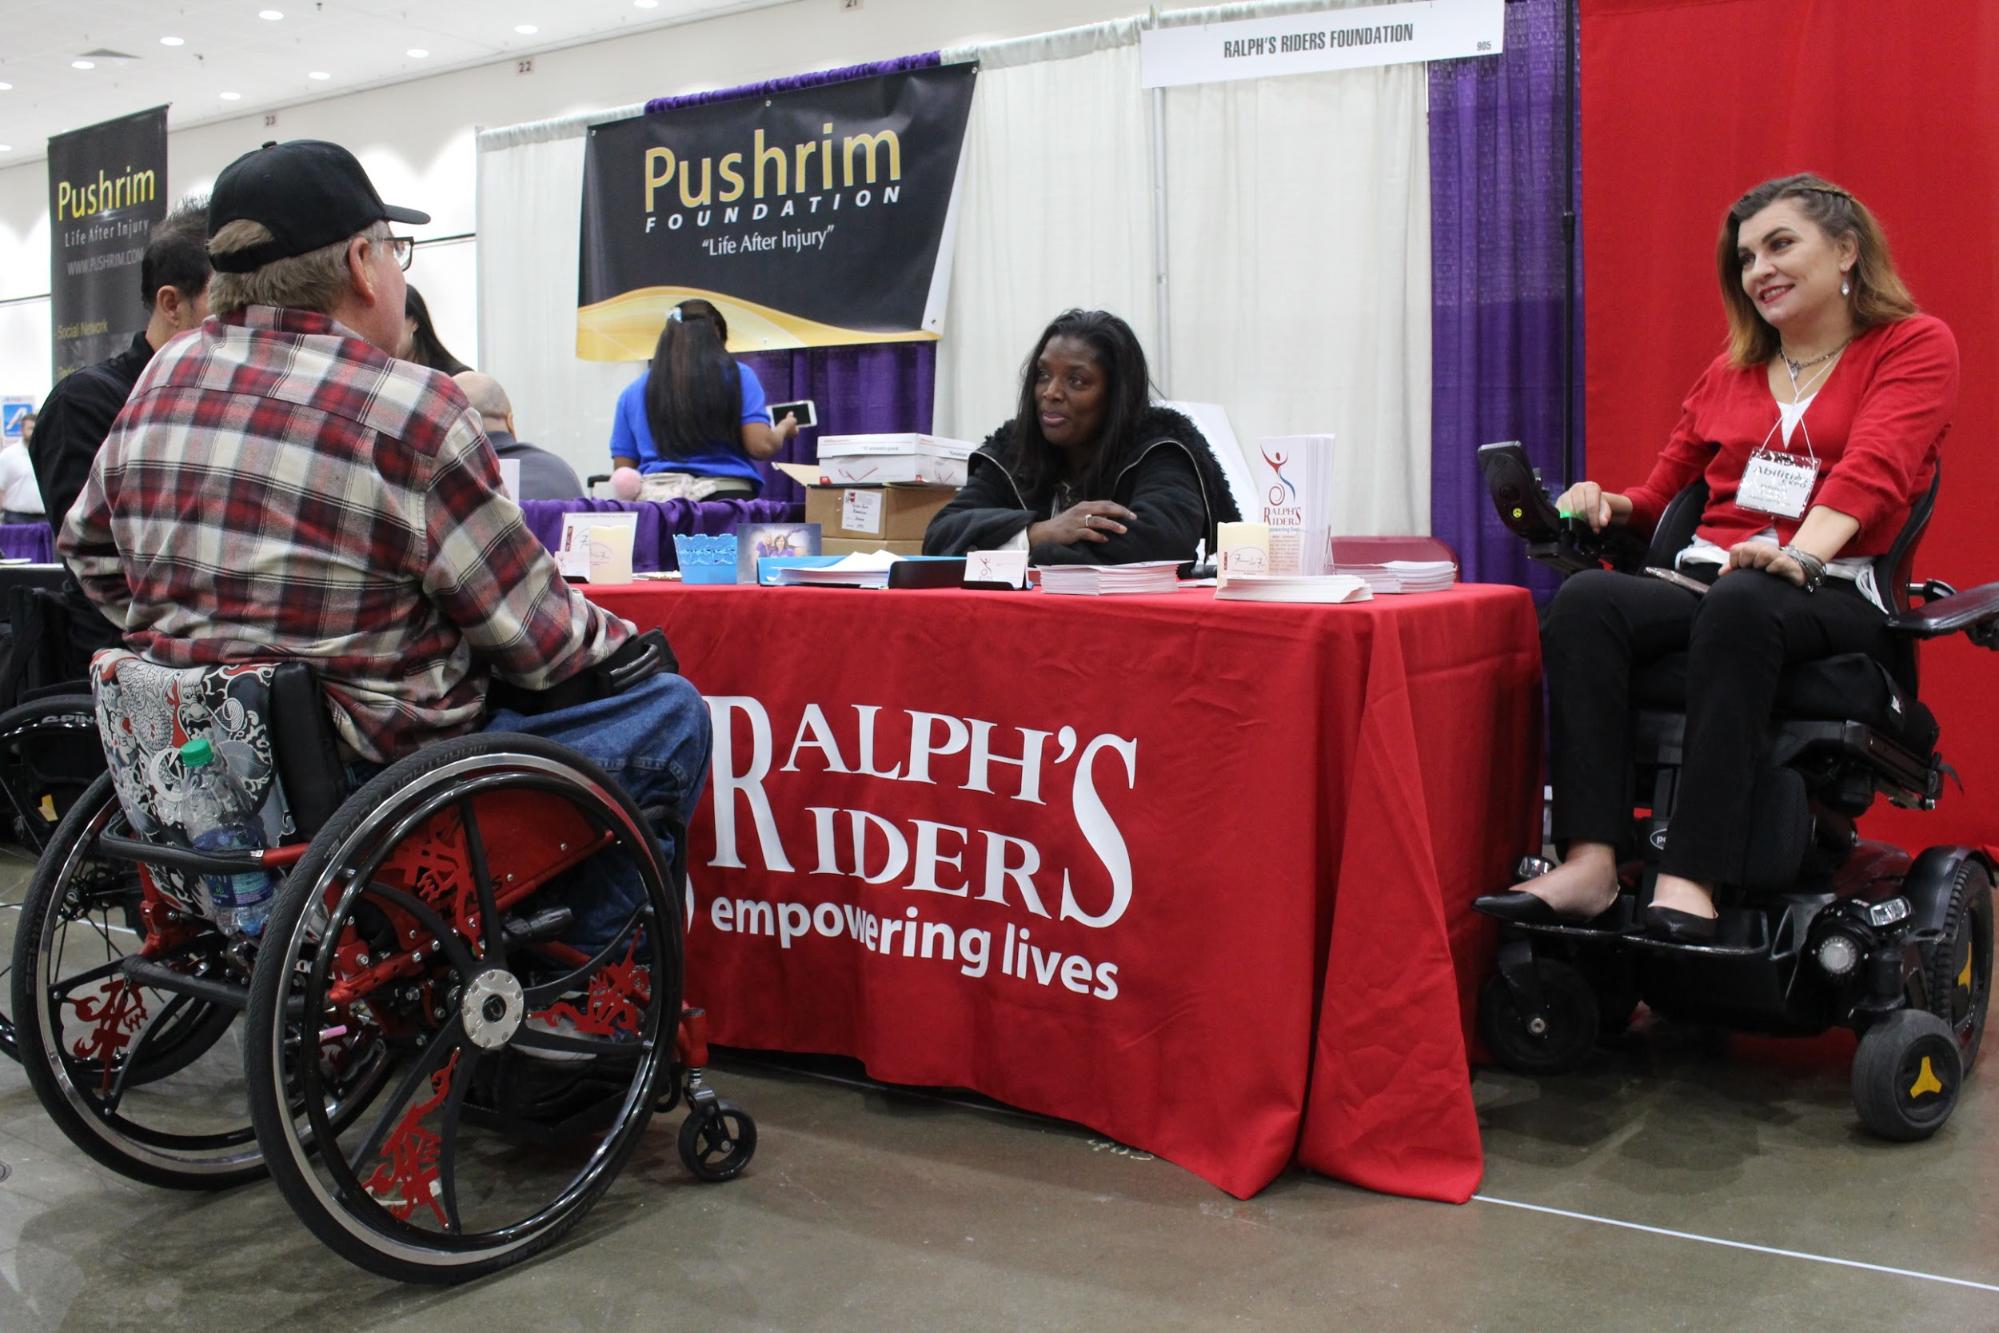 Marcy Lovett and Margarita Elizondo working the Ralph's Riders booth at Abilities Expo. A man in a wheelchair is visiting the booth.